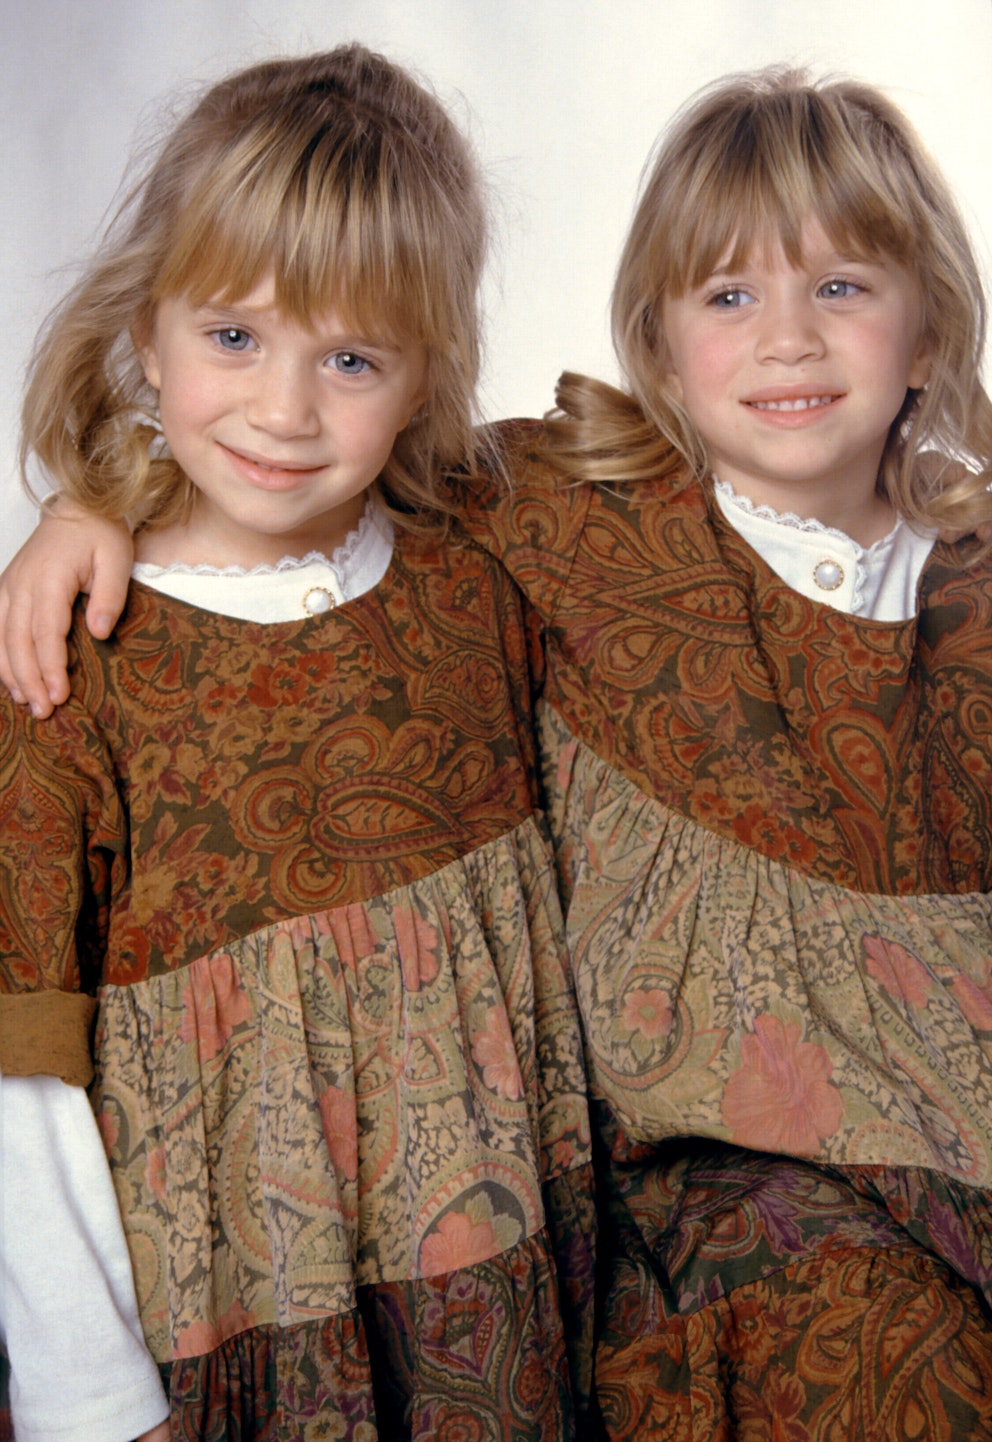 The Olsen Twins: 35 Facts You Didn't Know About Mary-Kate And Ashley ...